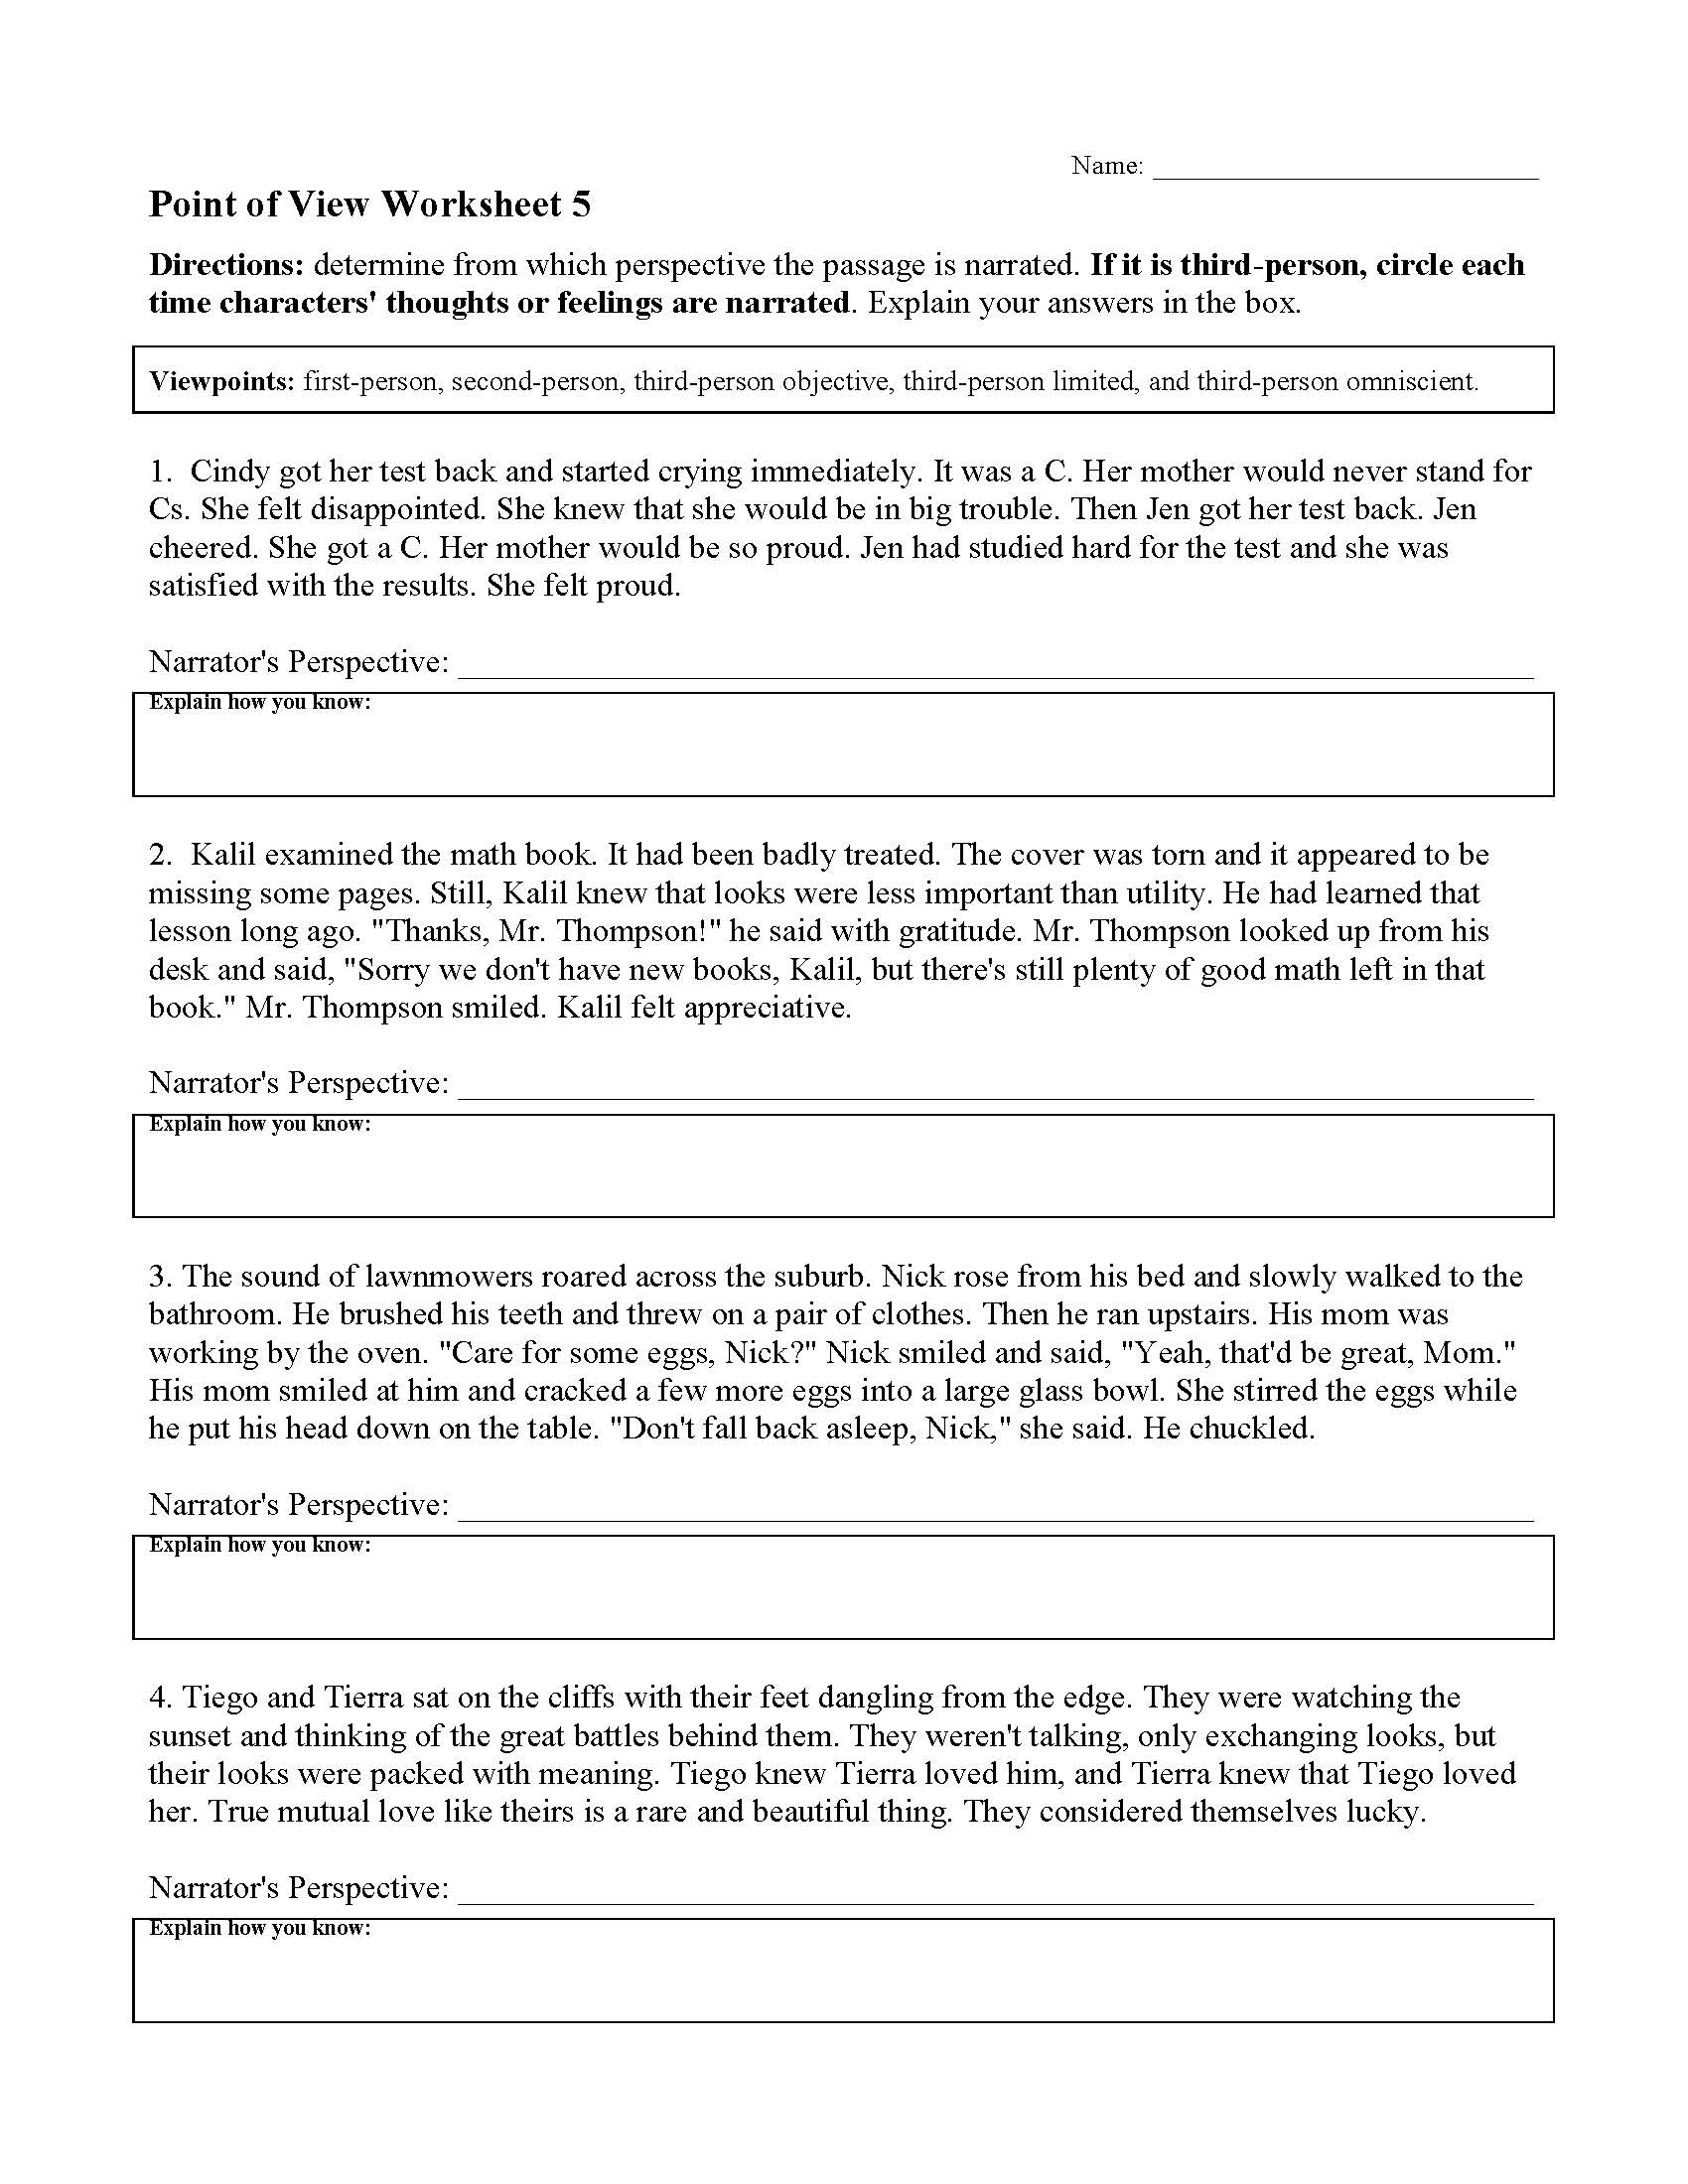 Point of View Worksheet 11  Preview For Point Of View Worksheet